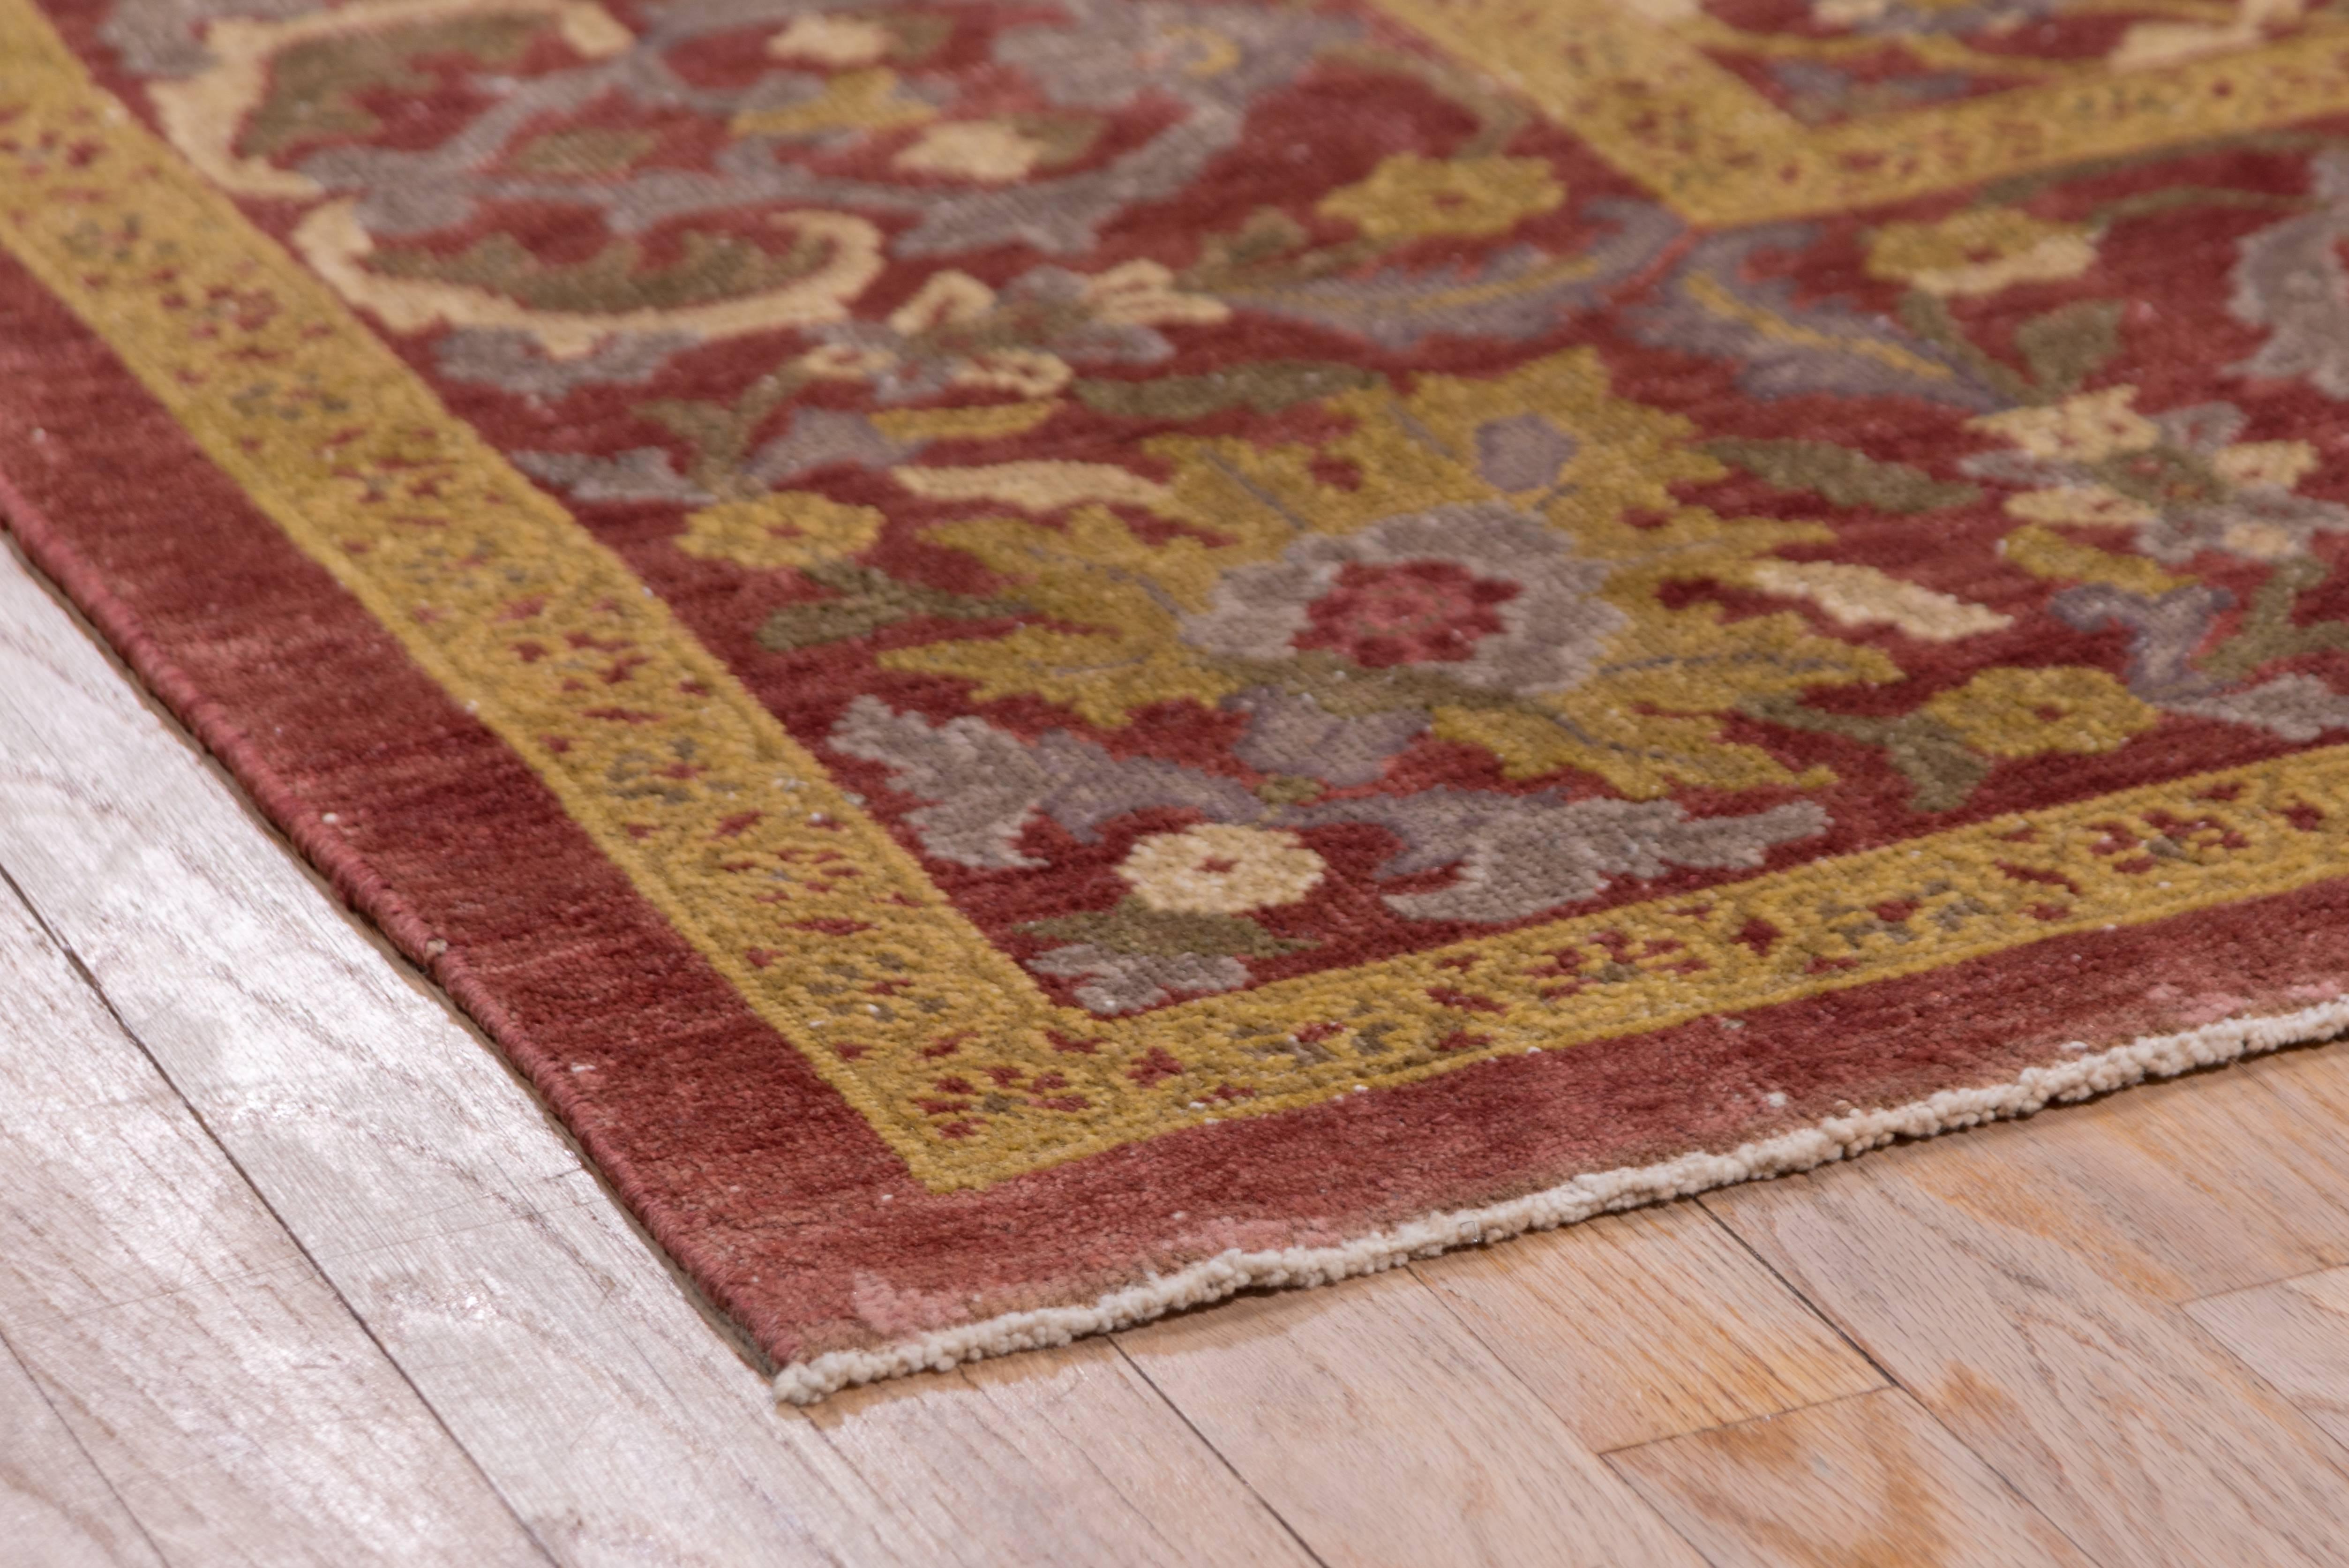 Early 20th Century Antique Mahal Carpet, Circa 1920s, Red Field